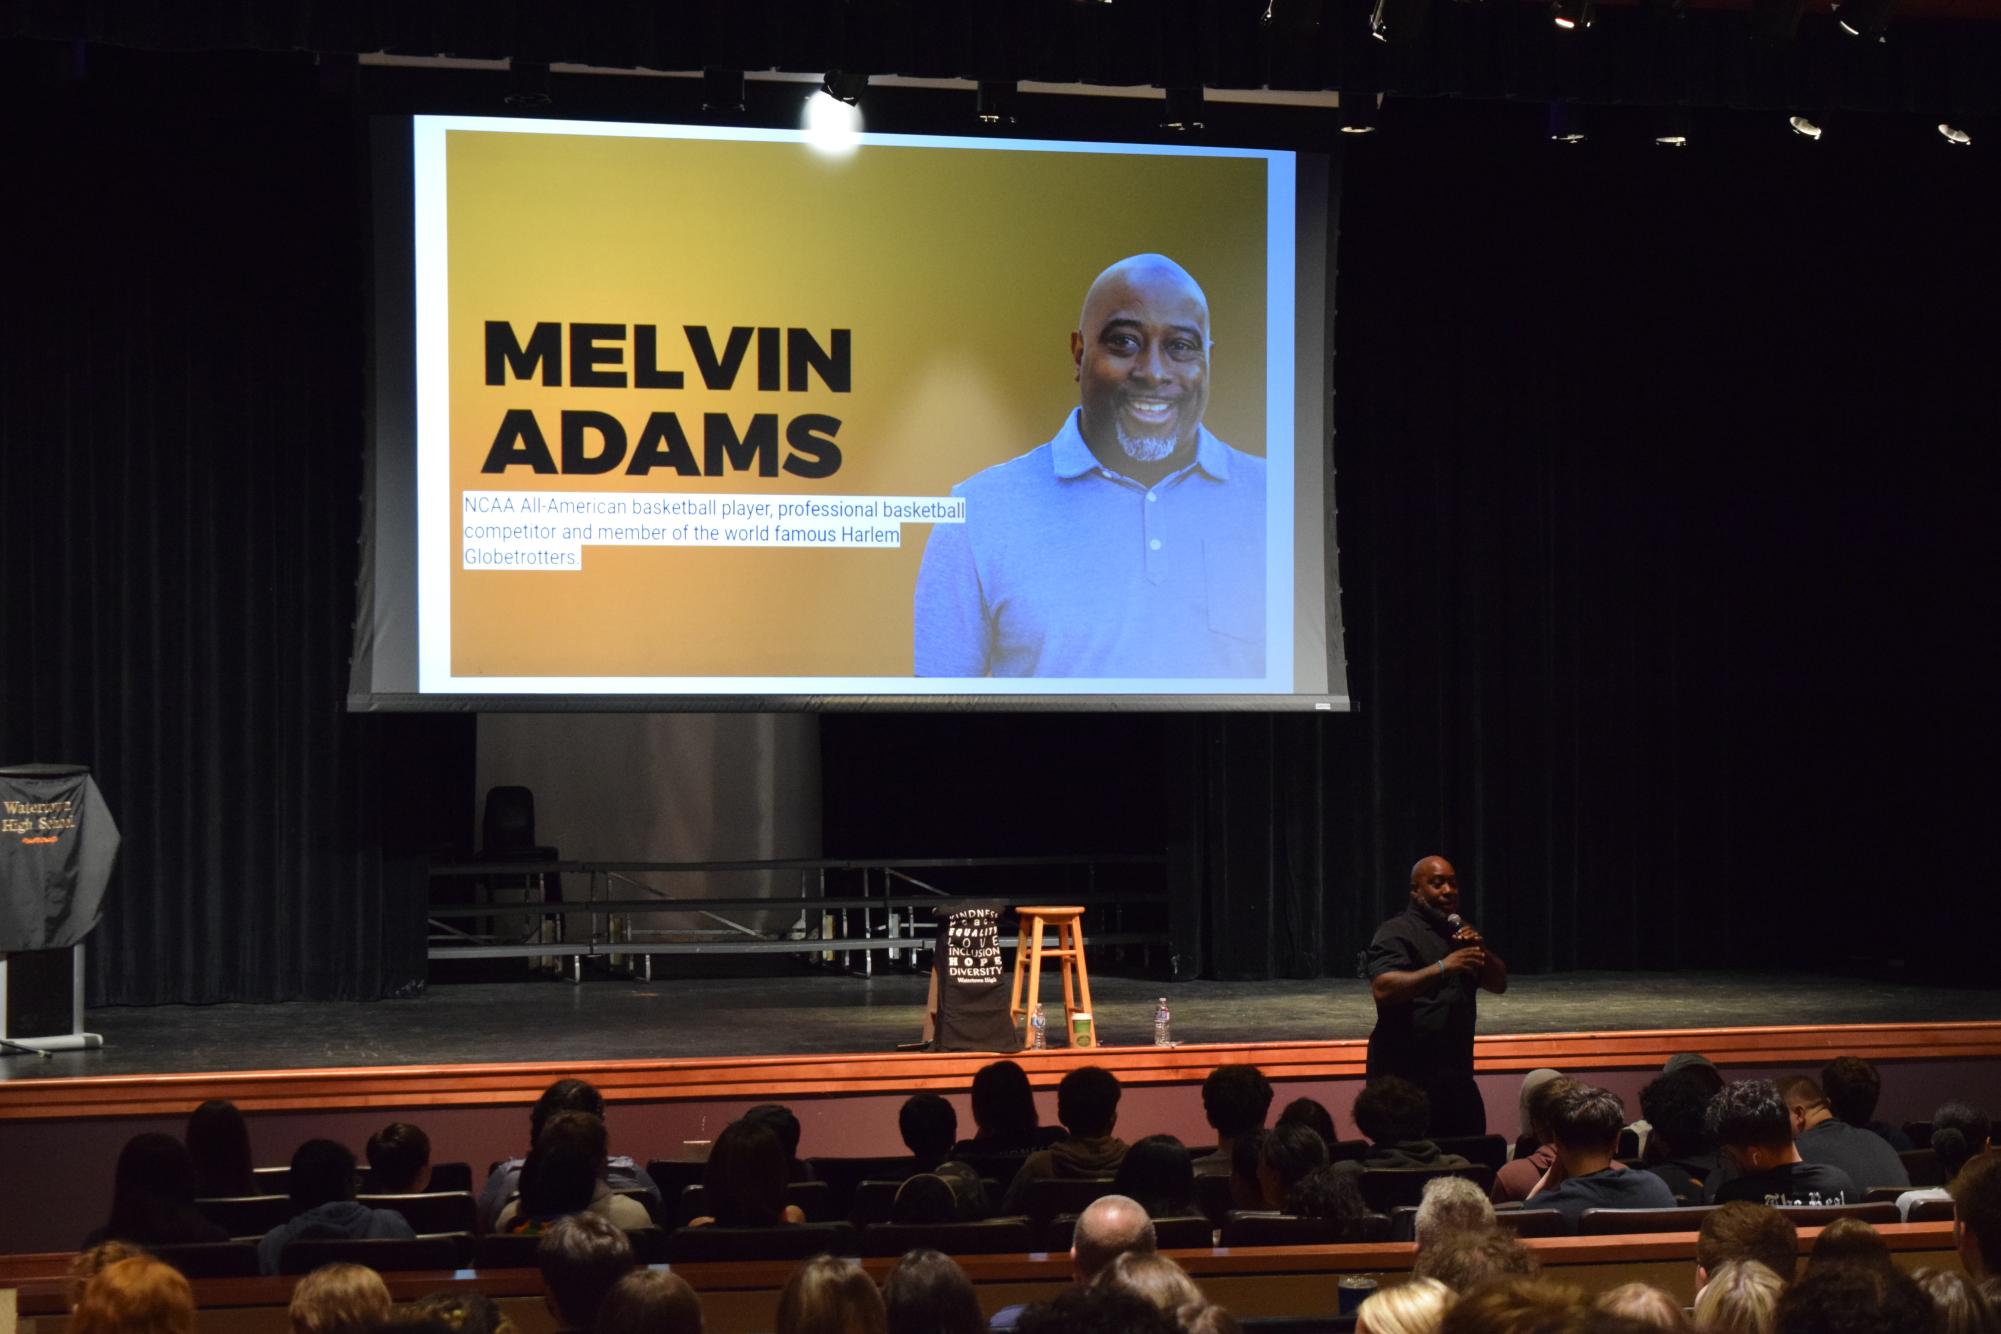 Melvin+Adams%3A+Guest+Speaker+at+WHS